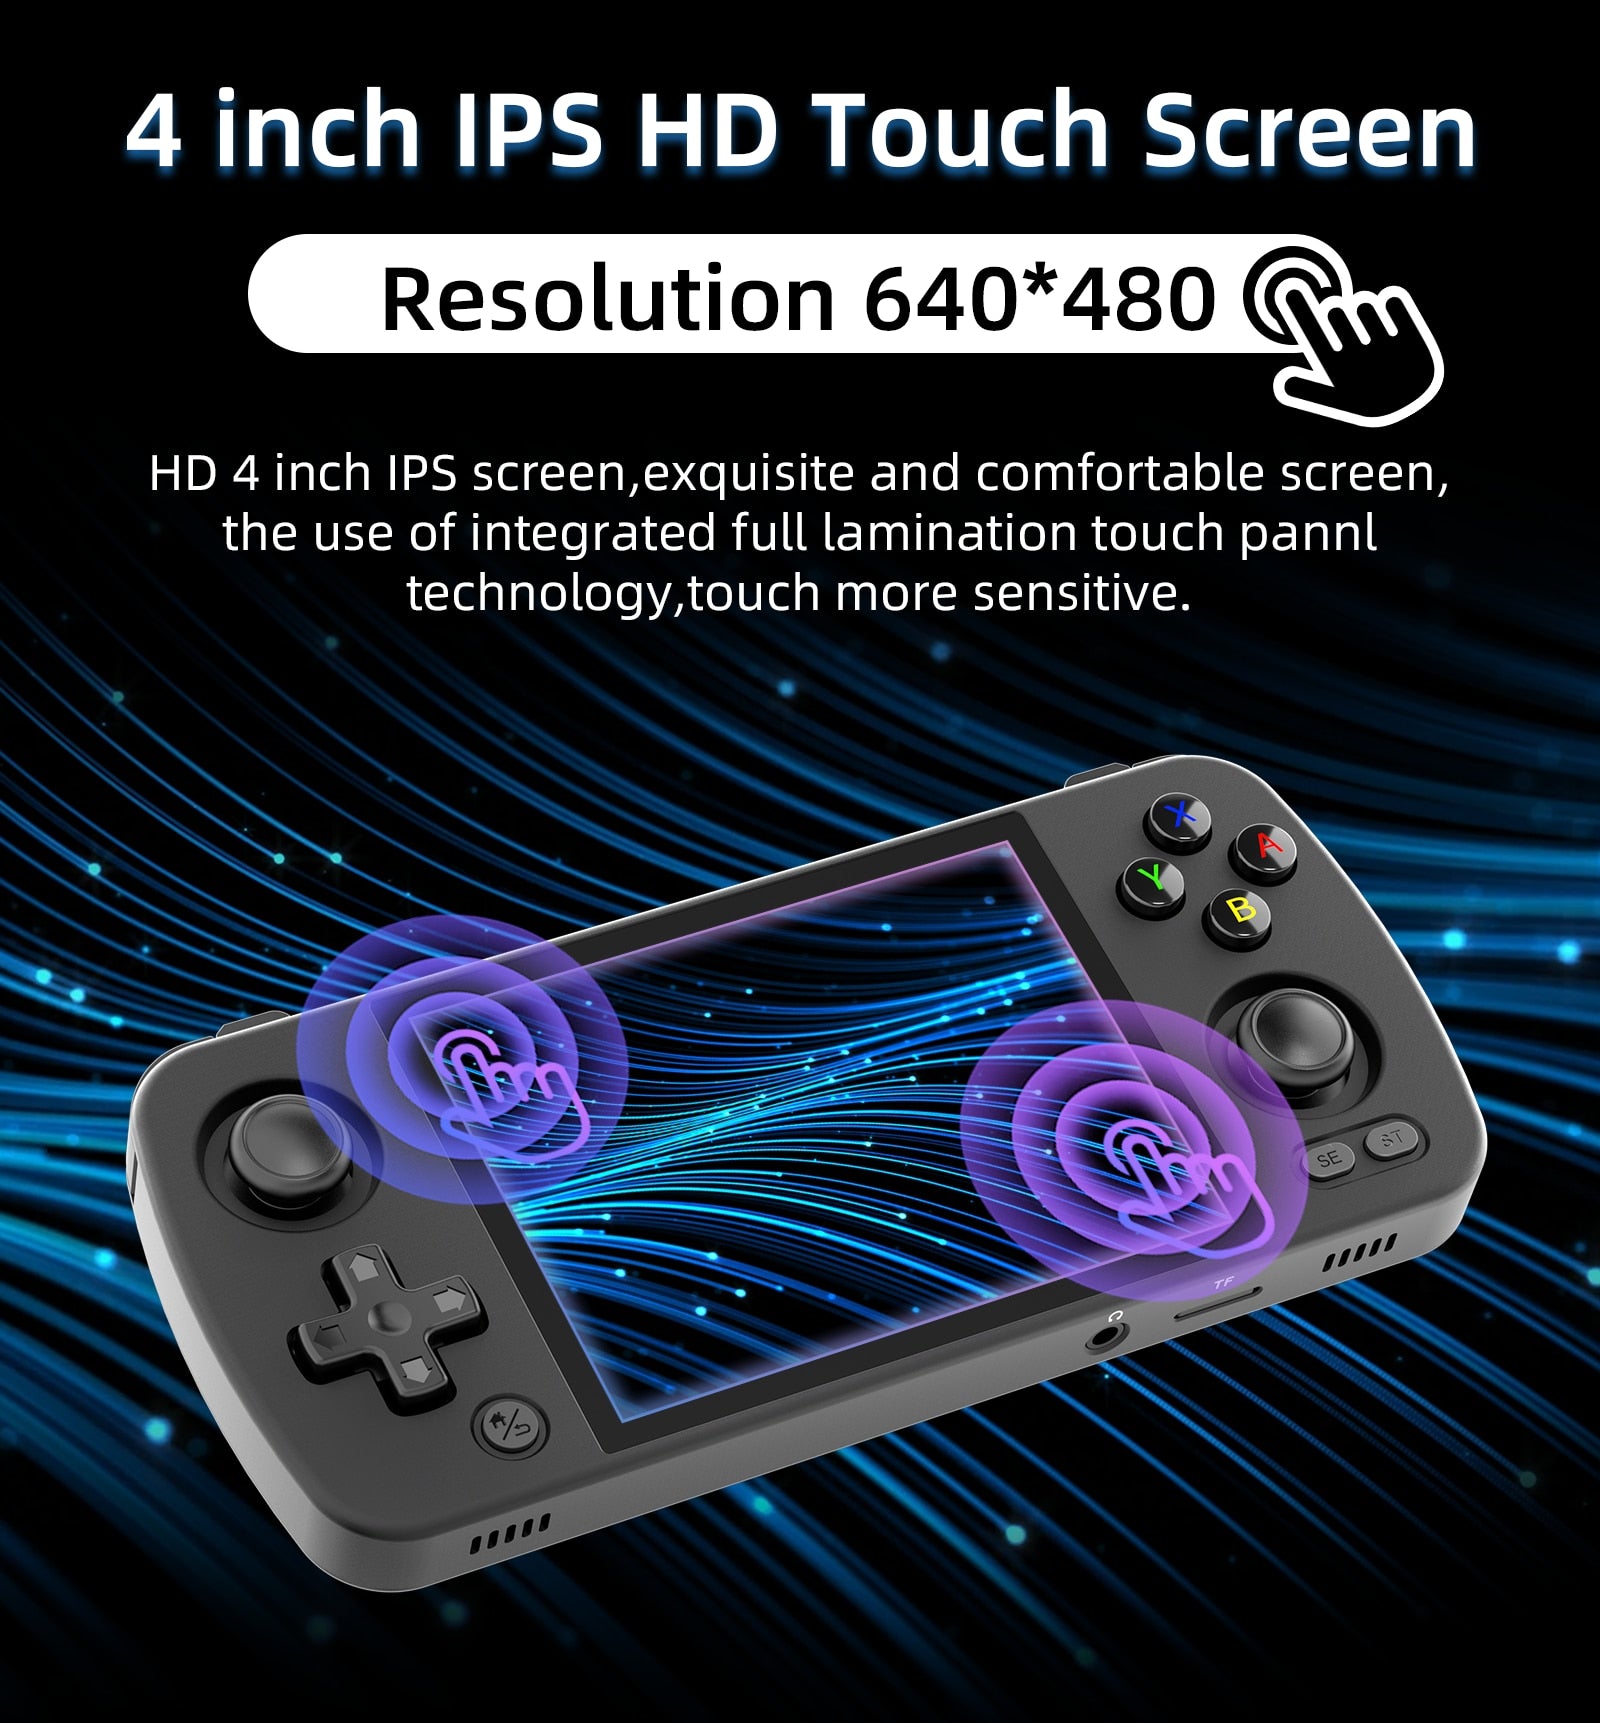 ANBERNIC RG405M Retro Handheld Game Console Android 12 4 inch IPS ...